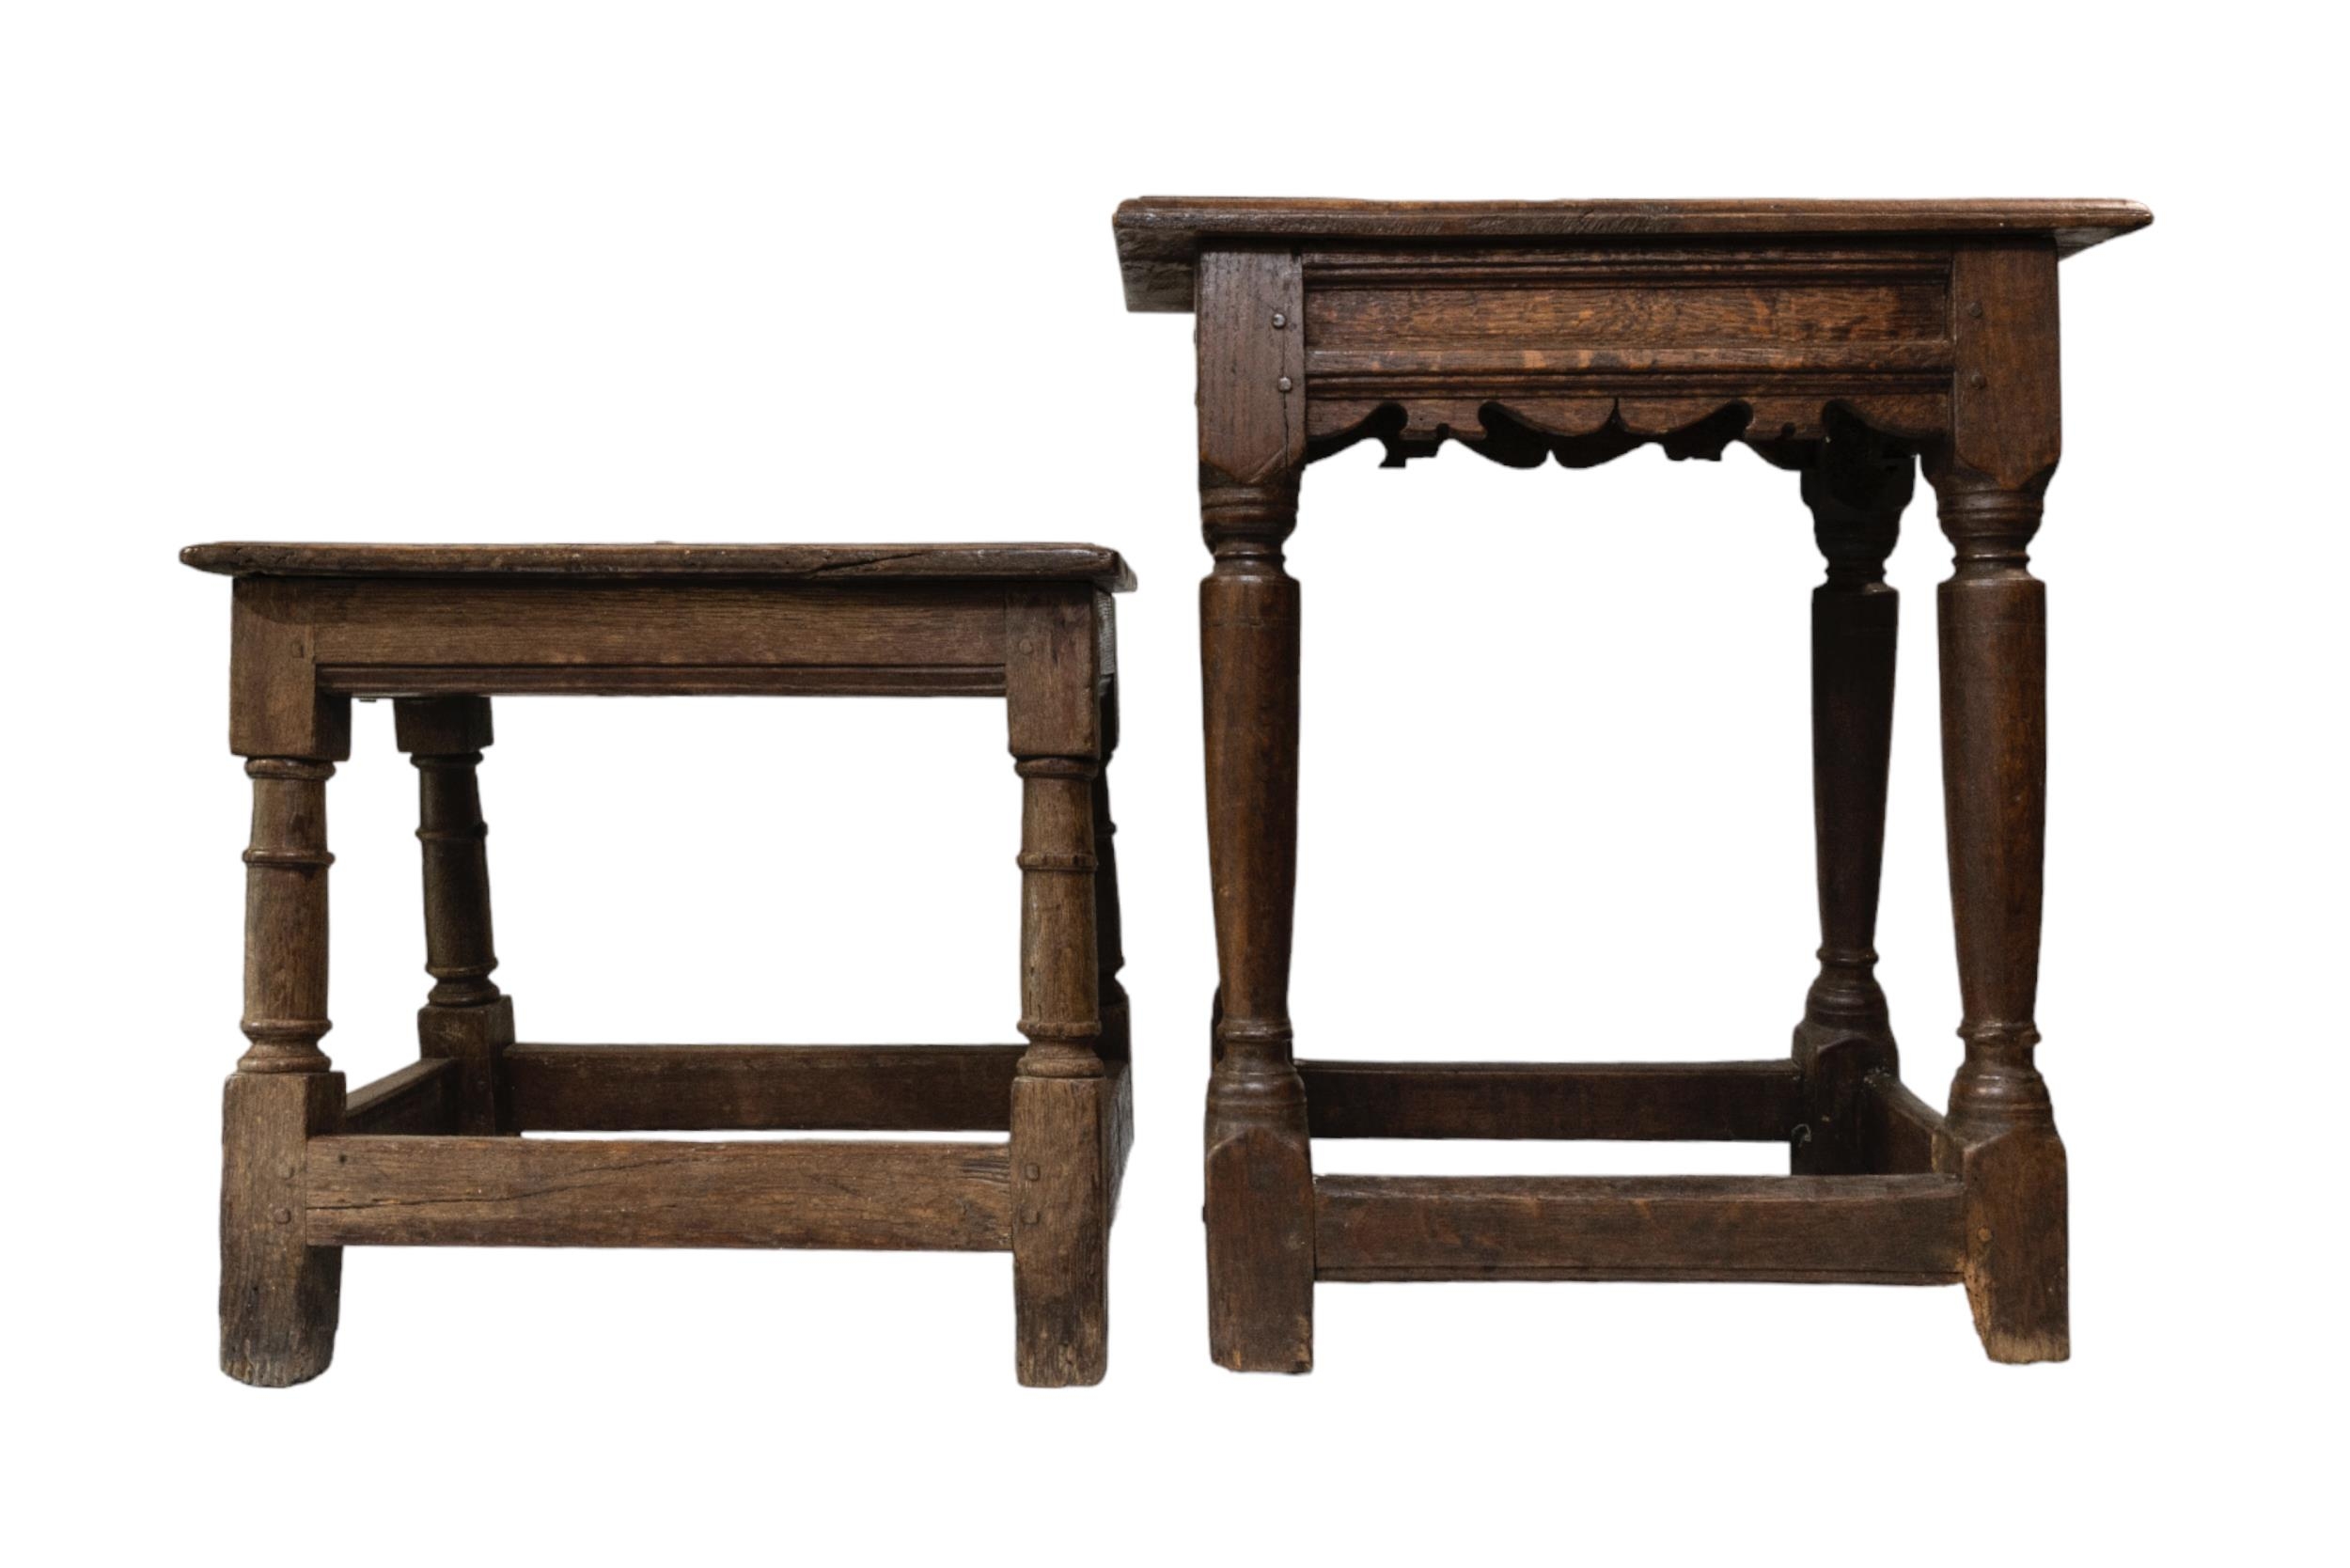 TWO OAK JOINT STOOLS, 18TH CENTURY, both with moulded seat panels raised on ring turned legs